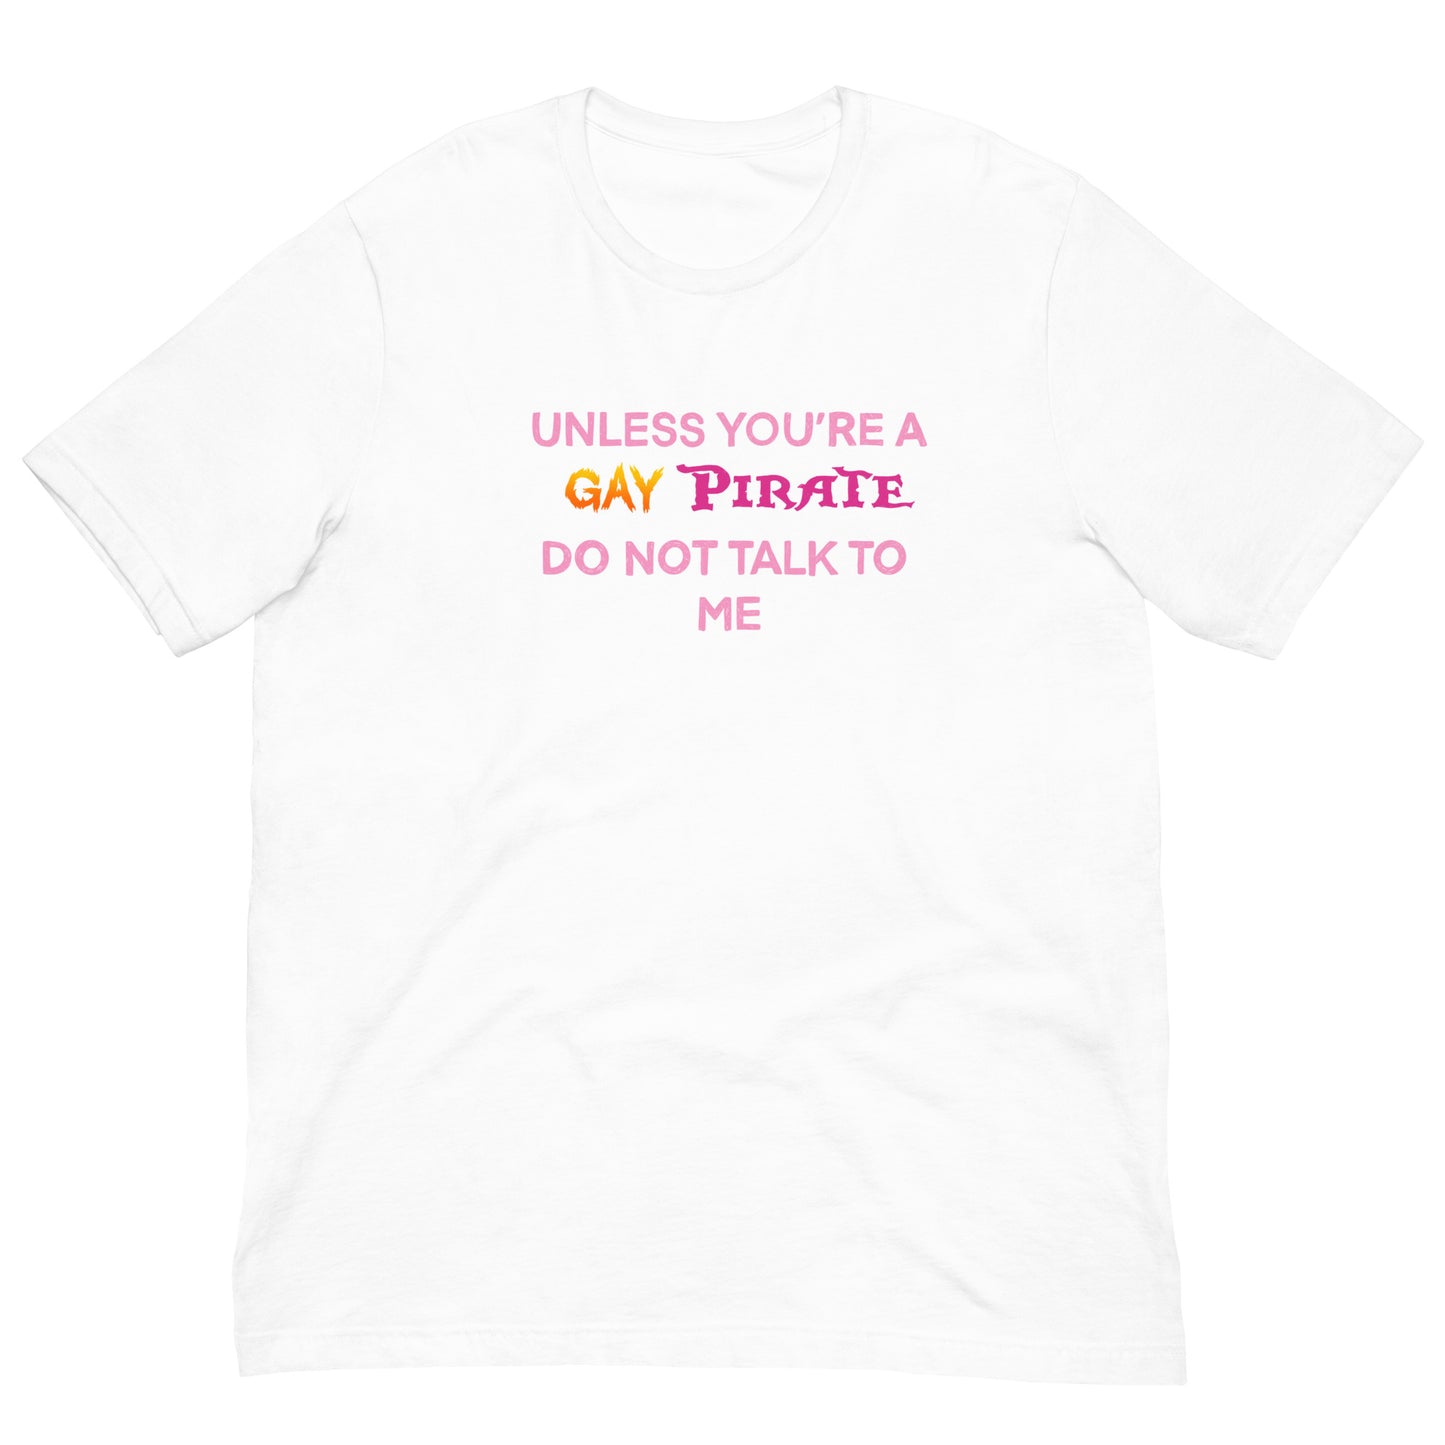 Unless You’re A Gay Pirate Do Not Talk To Me Tee